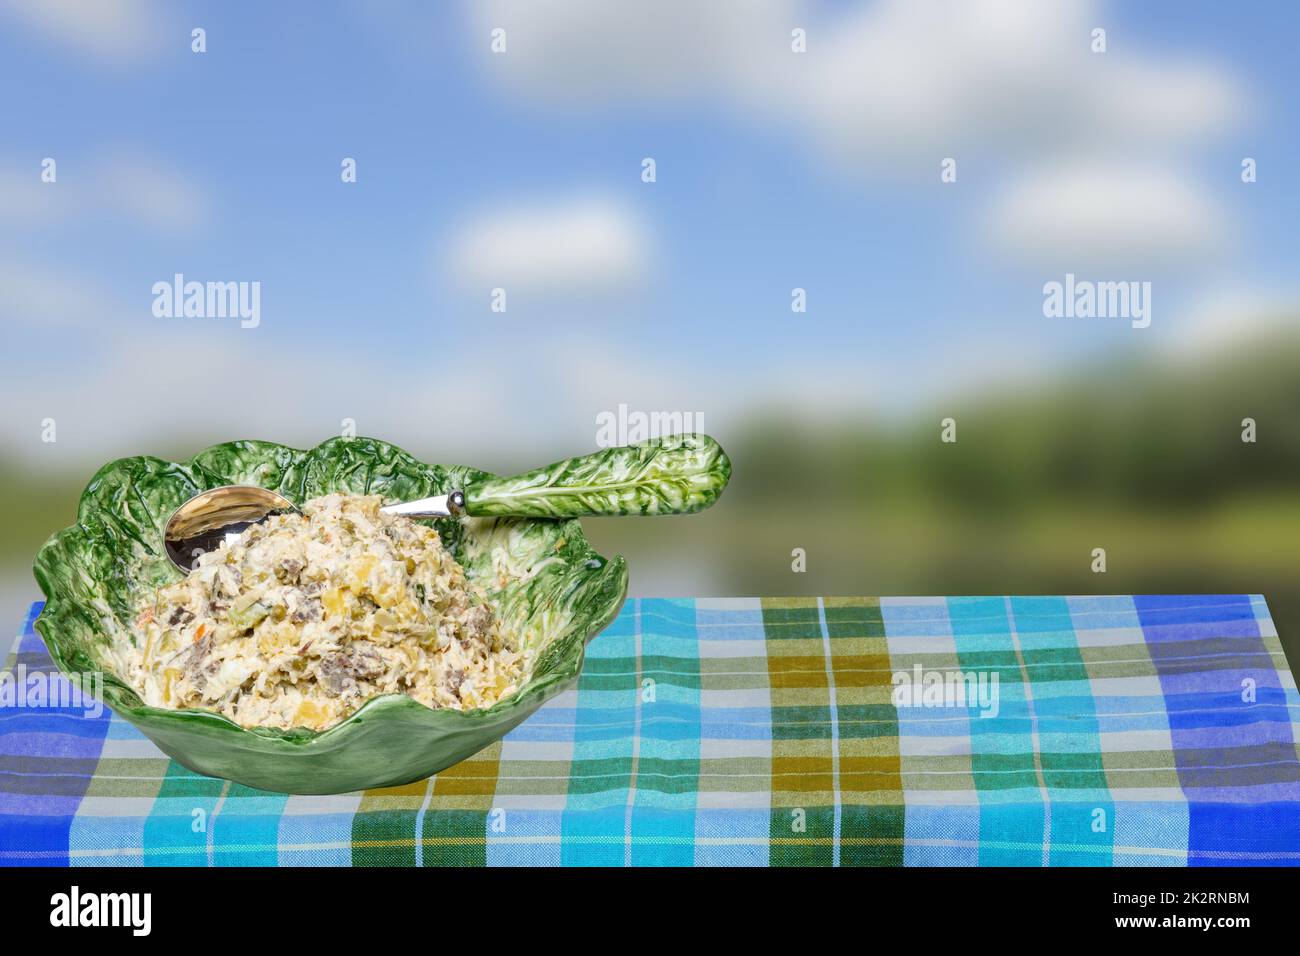 A decorative bowl with salad and matching spoon on a checkered table cloth over blurred natural background. Space for food and product display montage. Healthy food. Stock Photo